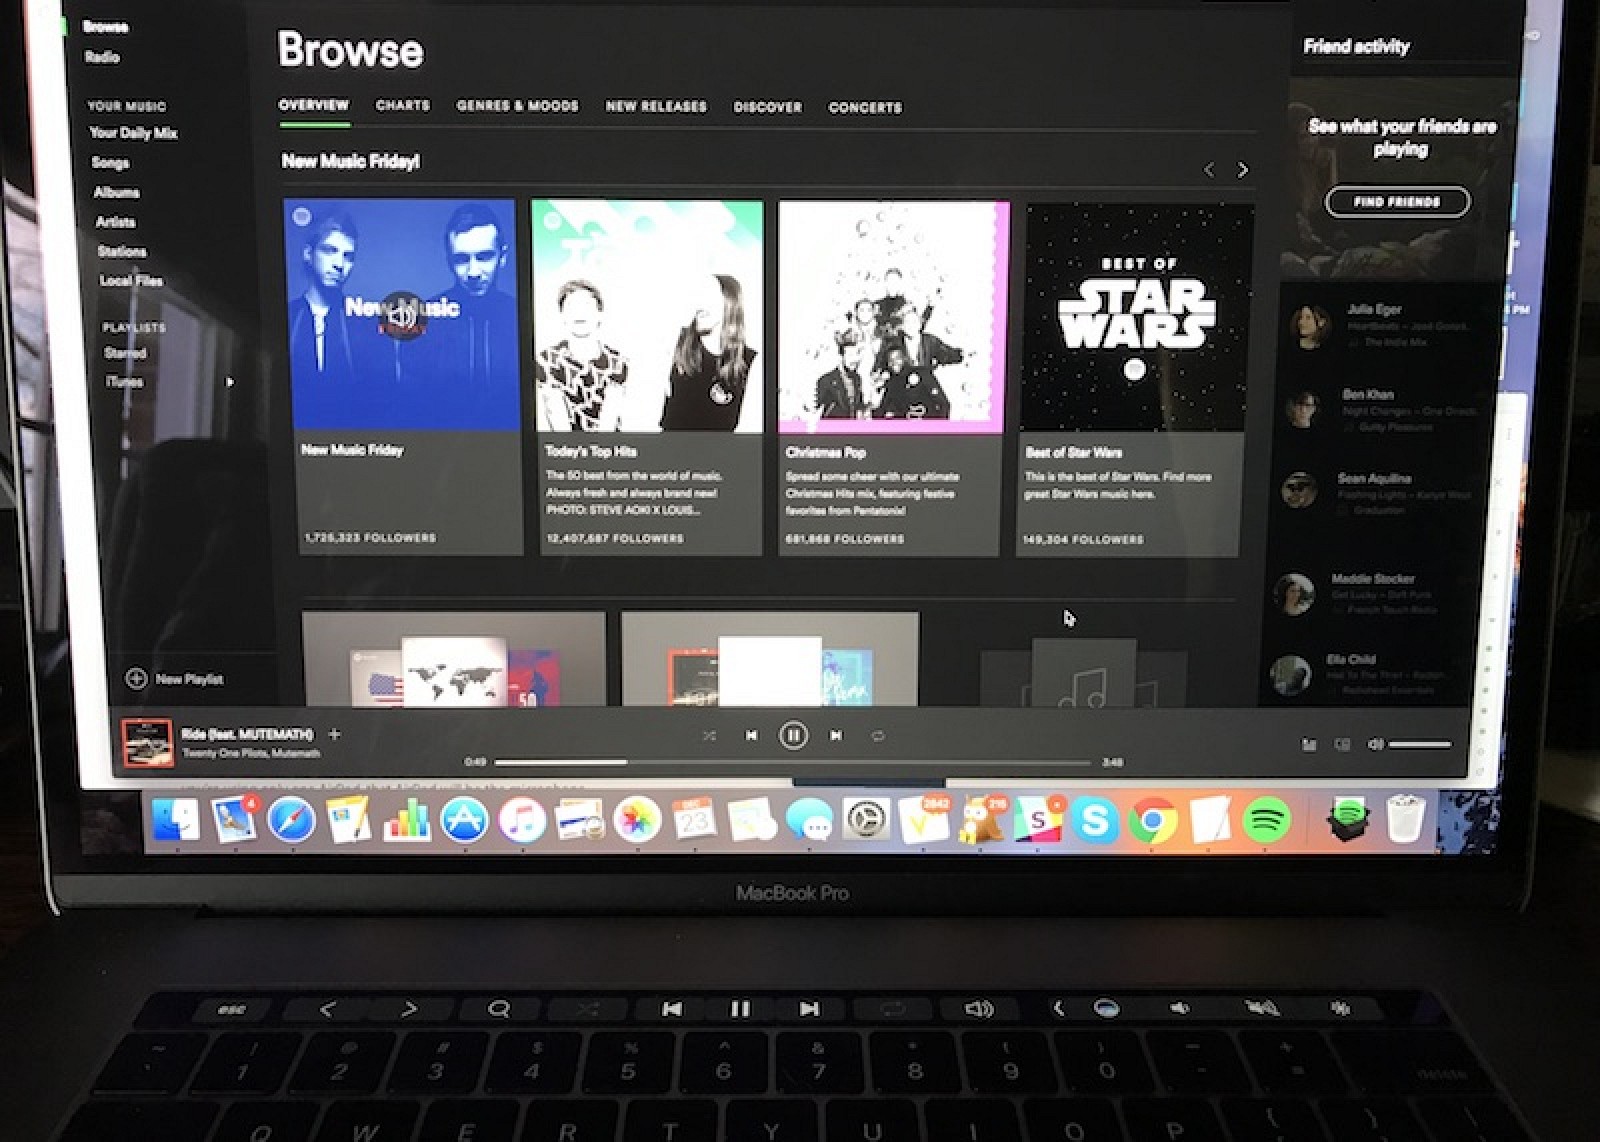 How to control spotify on mac with iphone